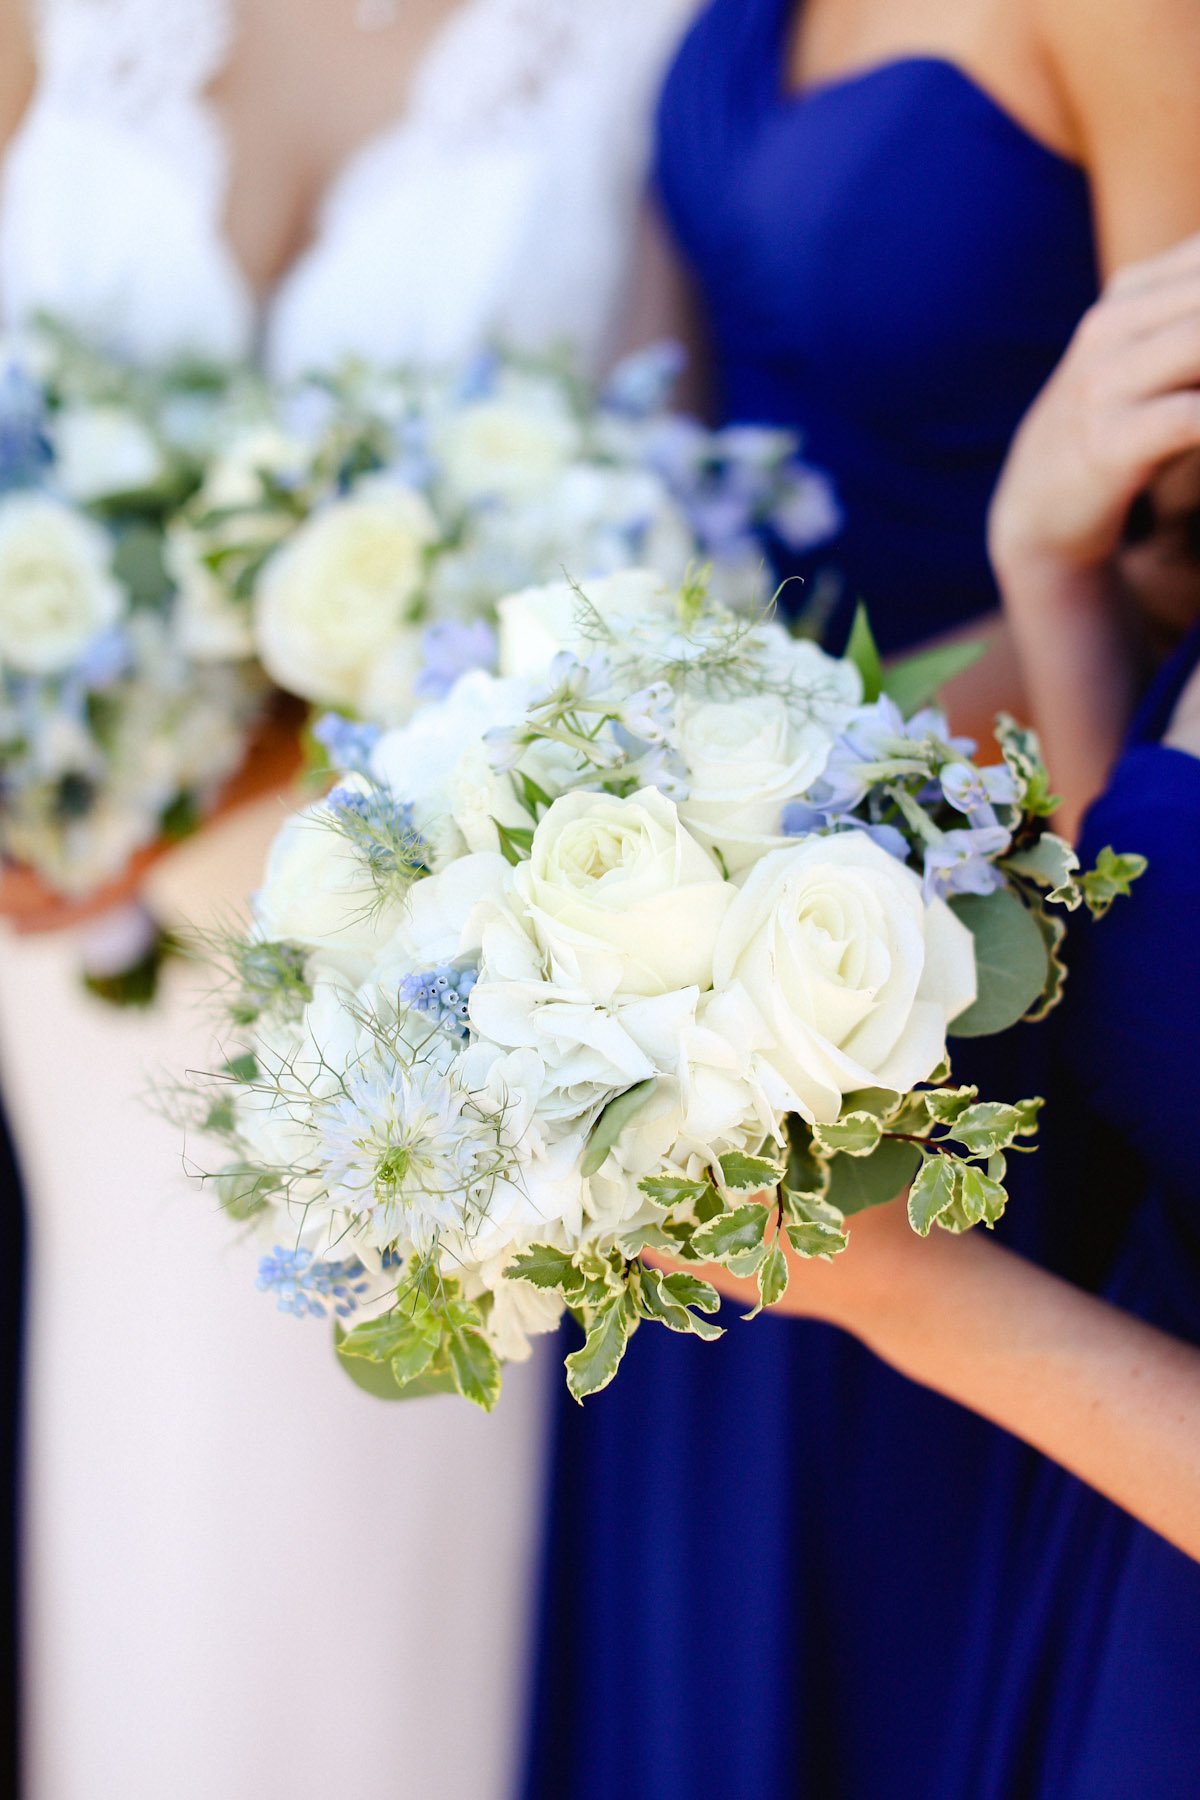 How to create wedding party bouquets with profitability in mind